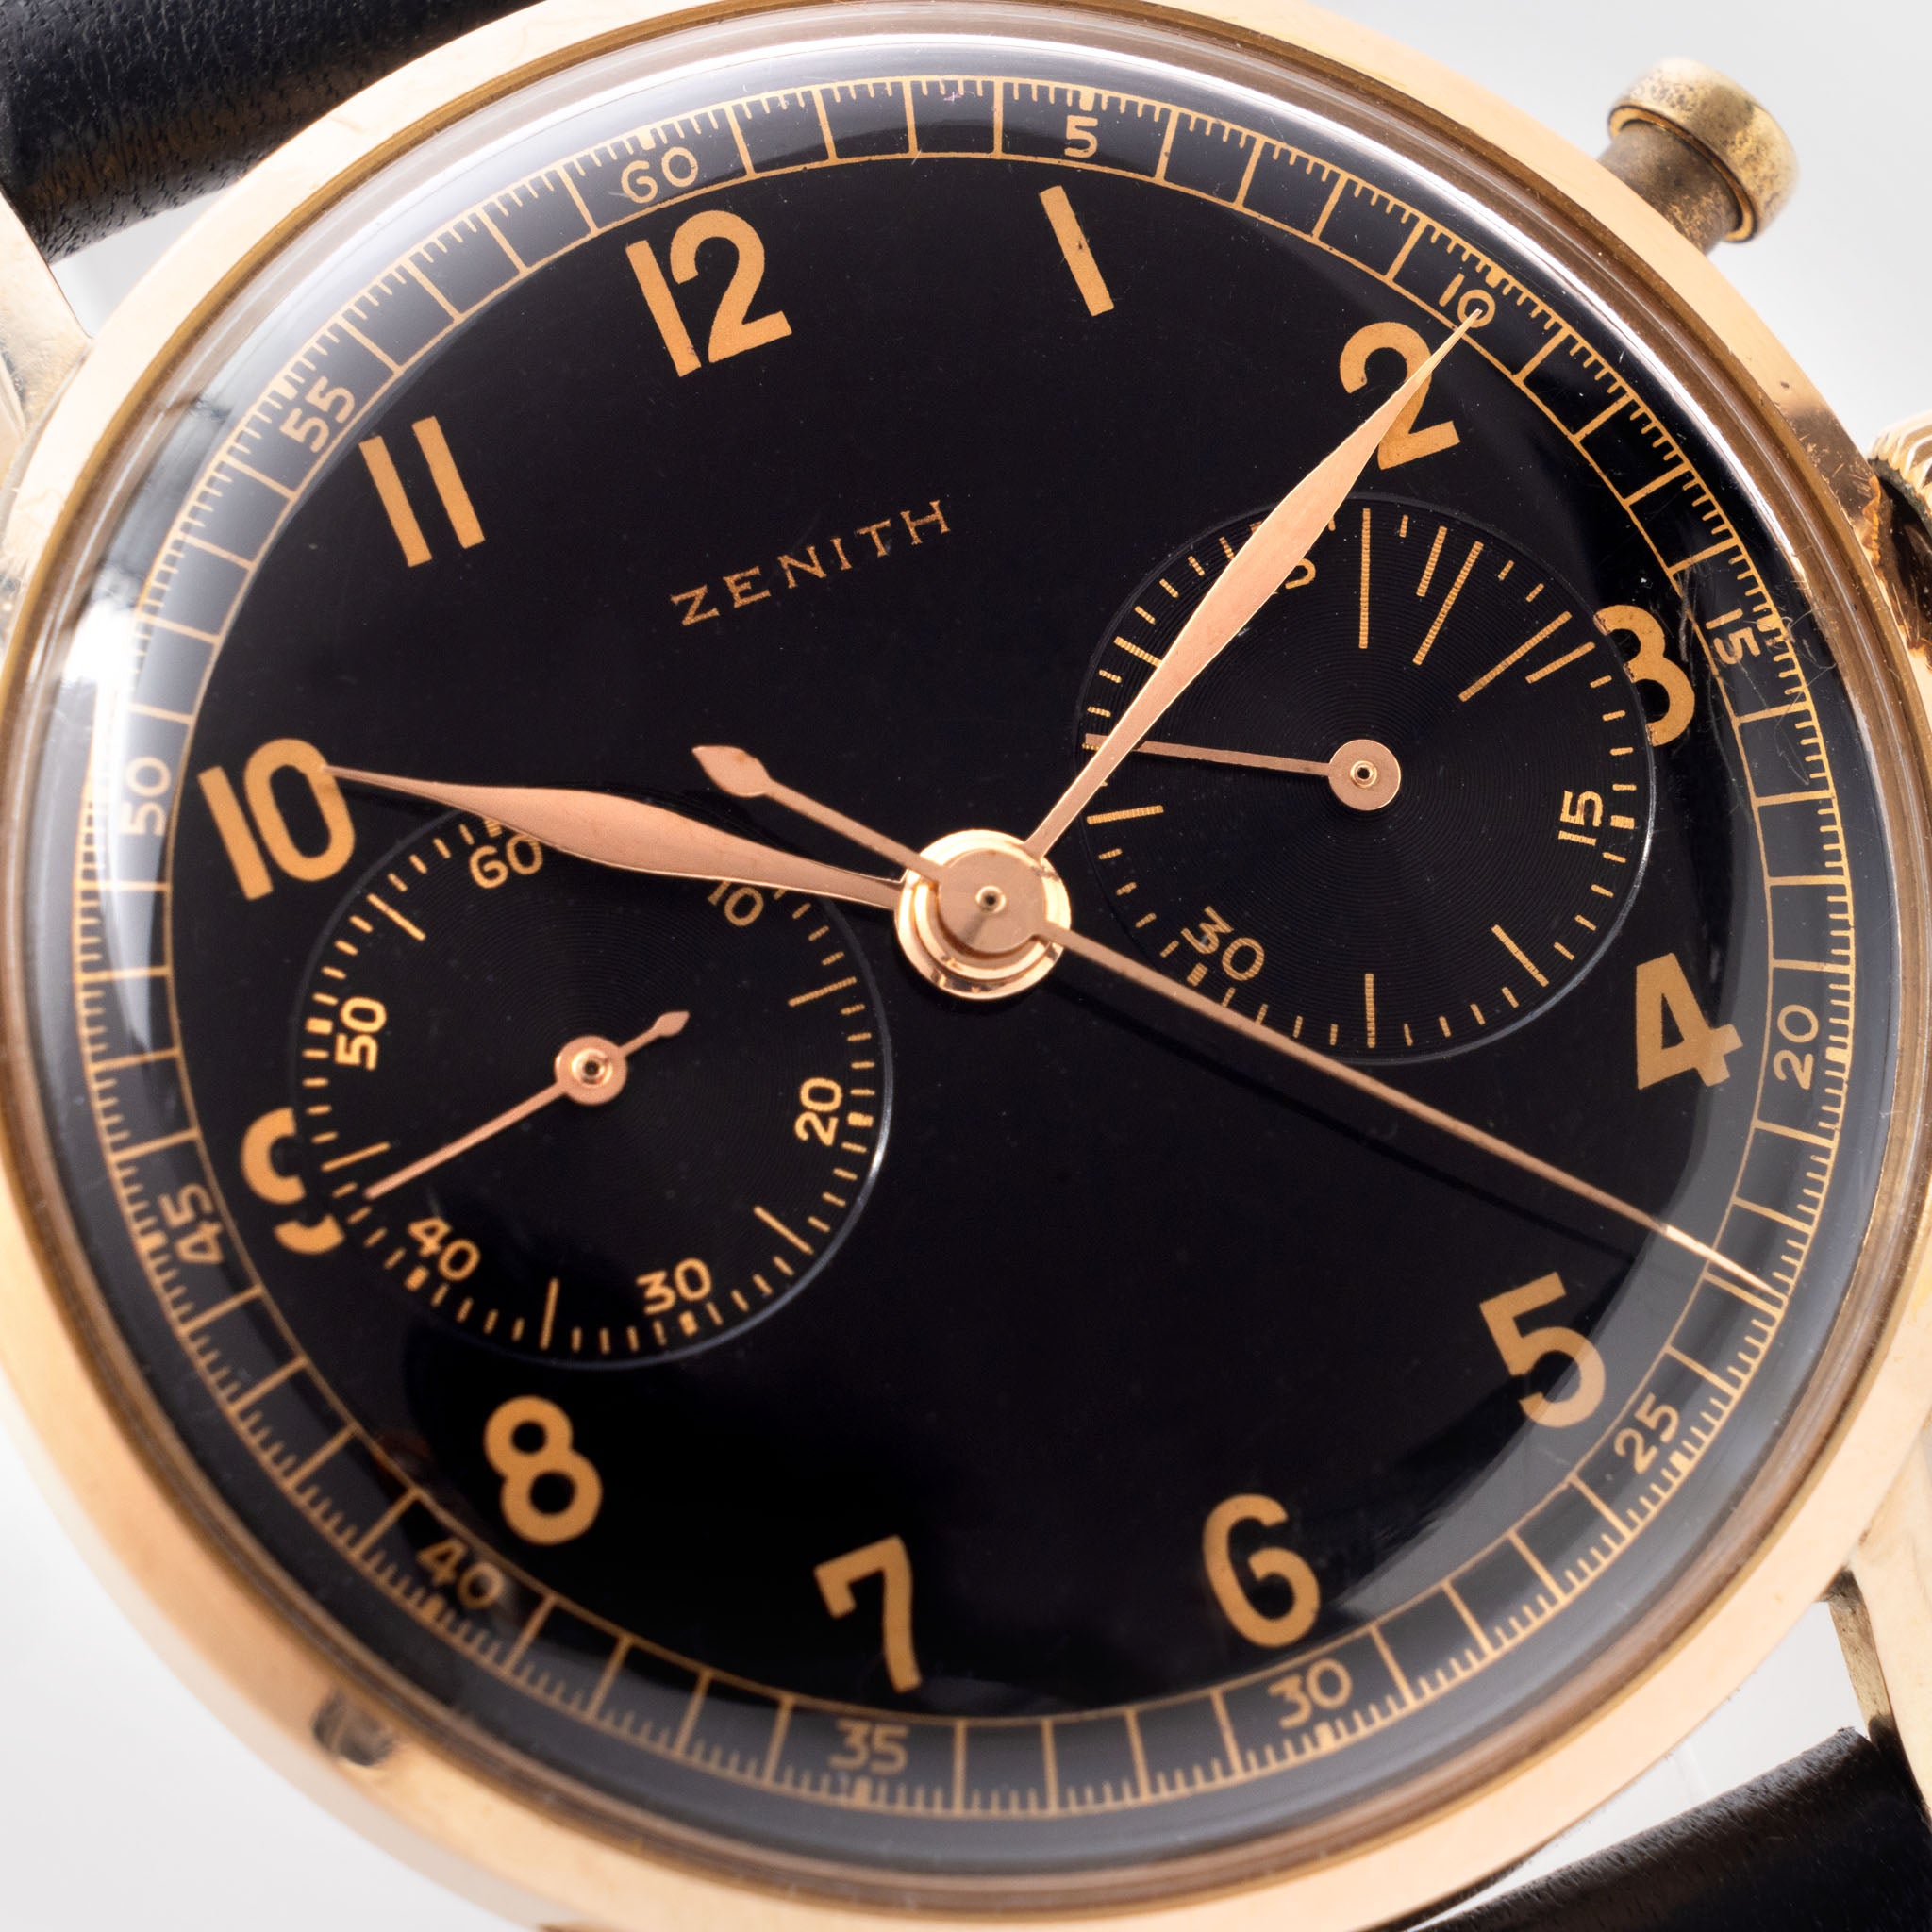 Zenith Chronograph 18k Pink Gold with Military provenance